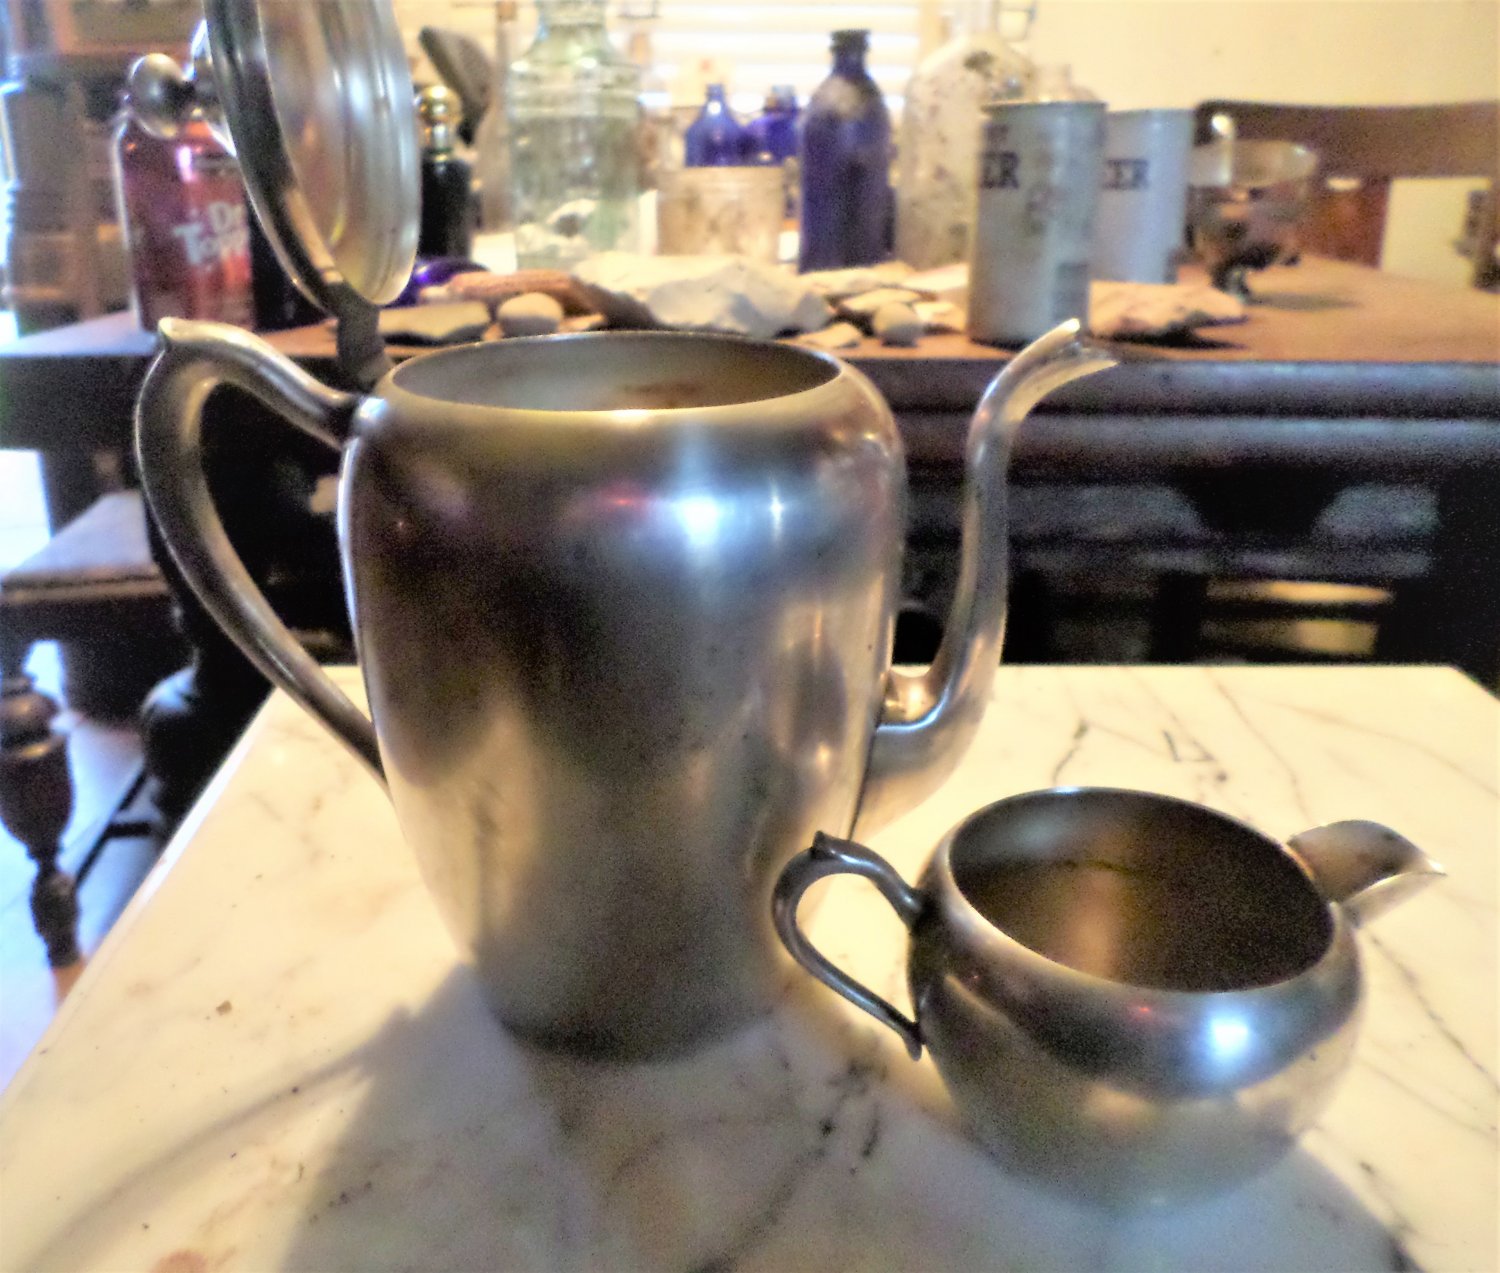 Antique Silverplated F B Rodgers Coffee/Teapot with matching creamer. 1800s